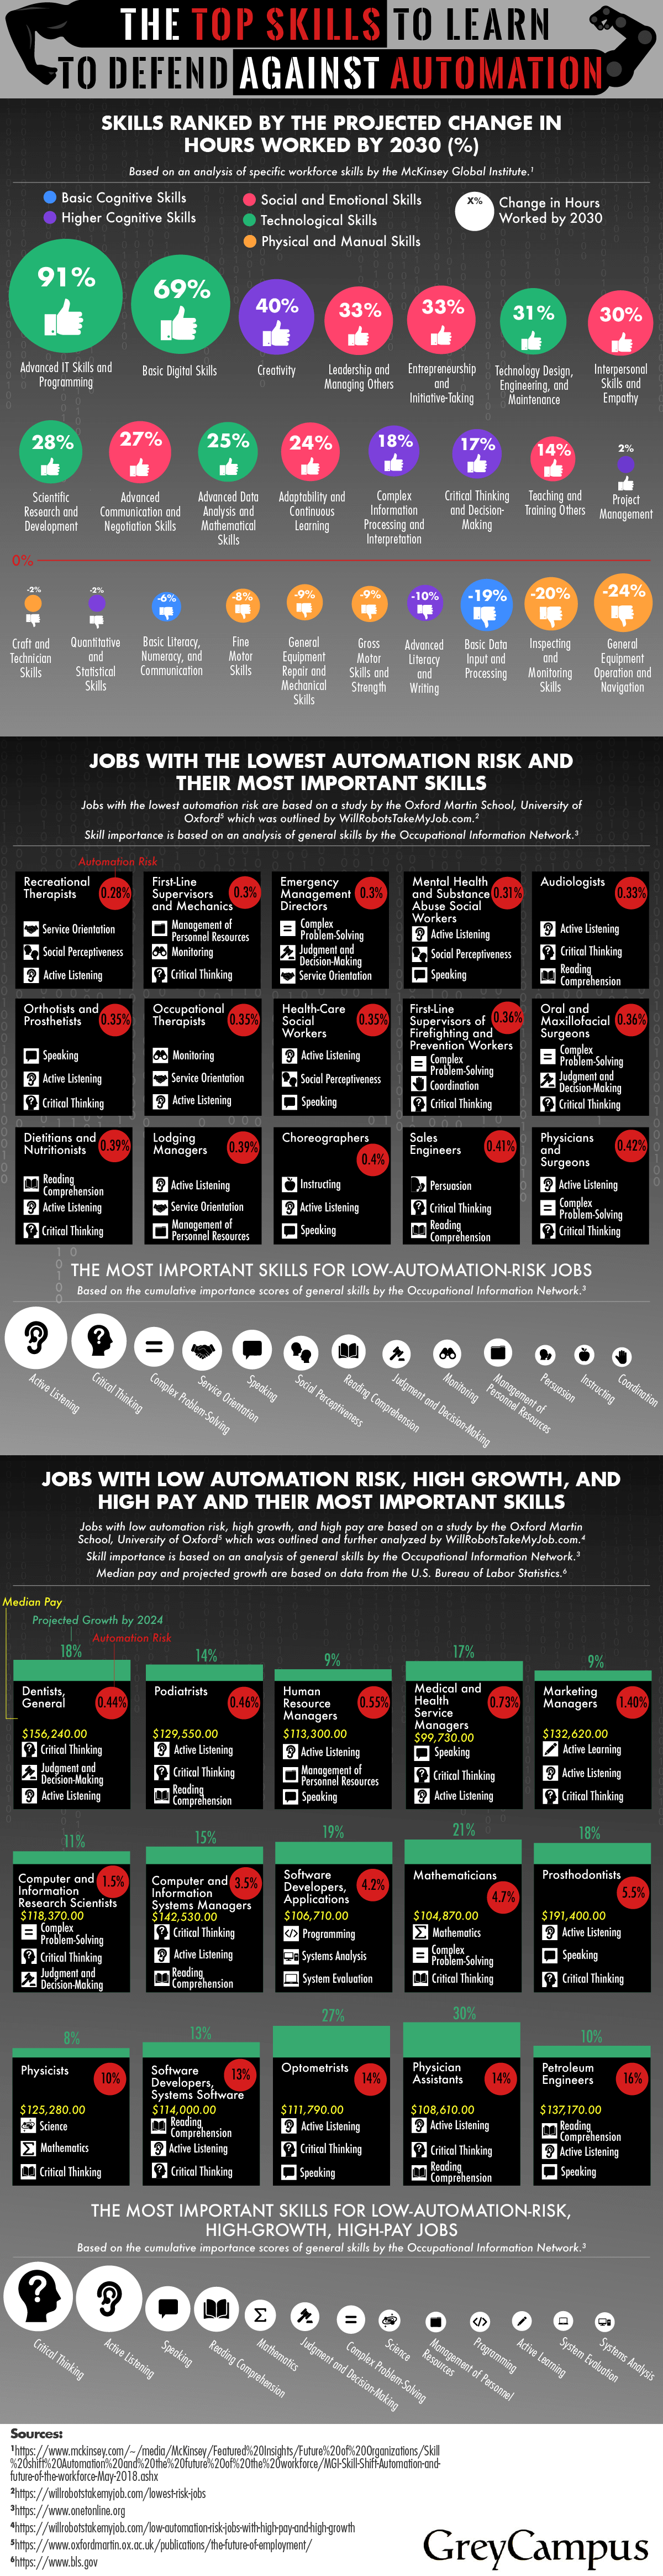 The Top Skills to Learn to Defend Against Automation